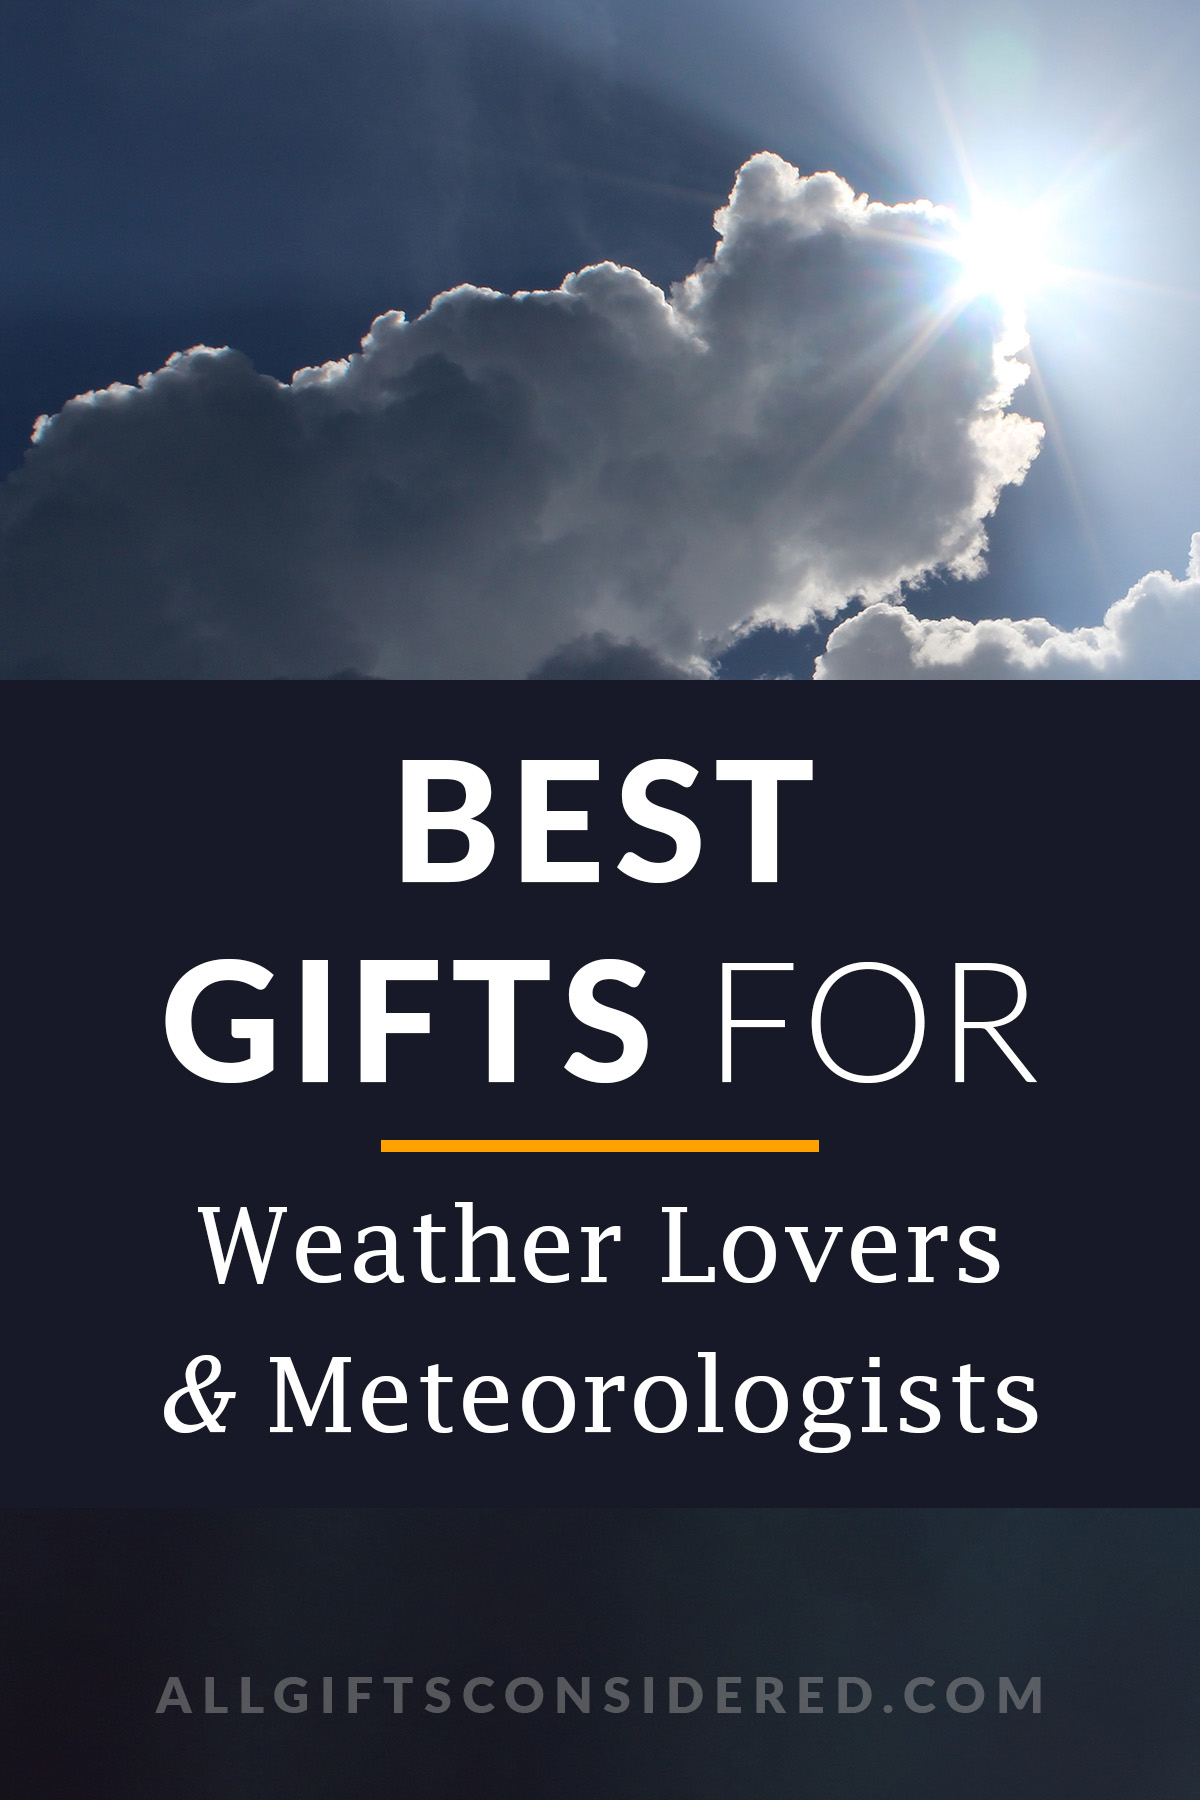 gifts for weather lovers - feature image